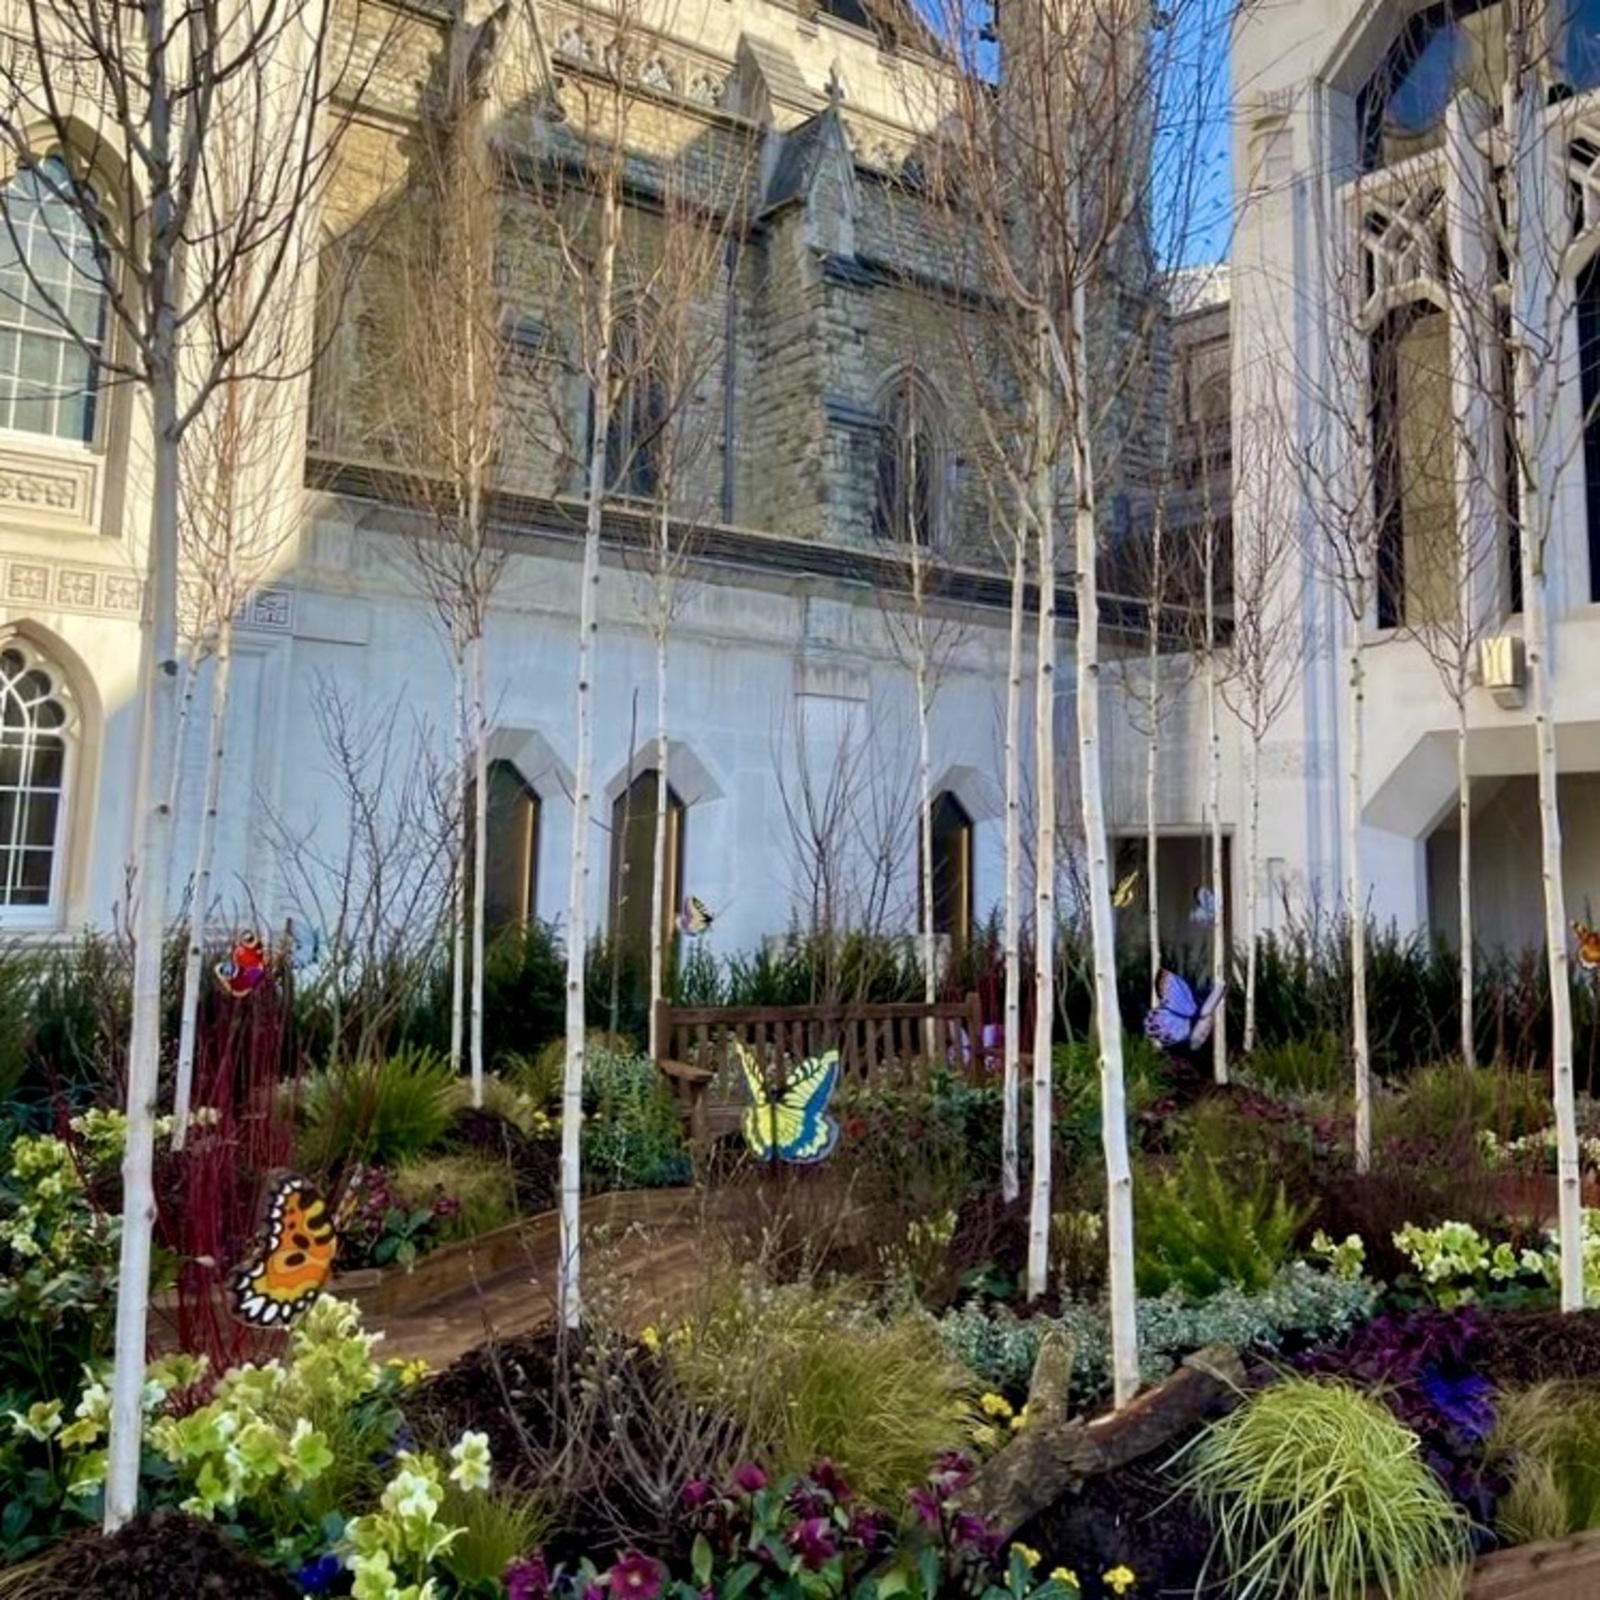 14 Feb 23 - Delighted to attend the opening of the Lord Mayor’s Big Curry Lunch Garden in Guildhall Yard. Tall young trees, surrounded by fallen trunks. A fitting reminder.